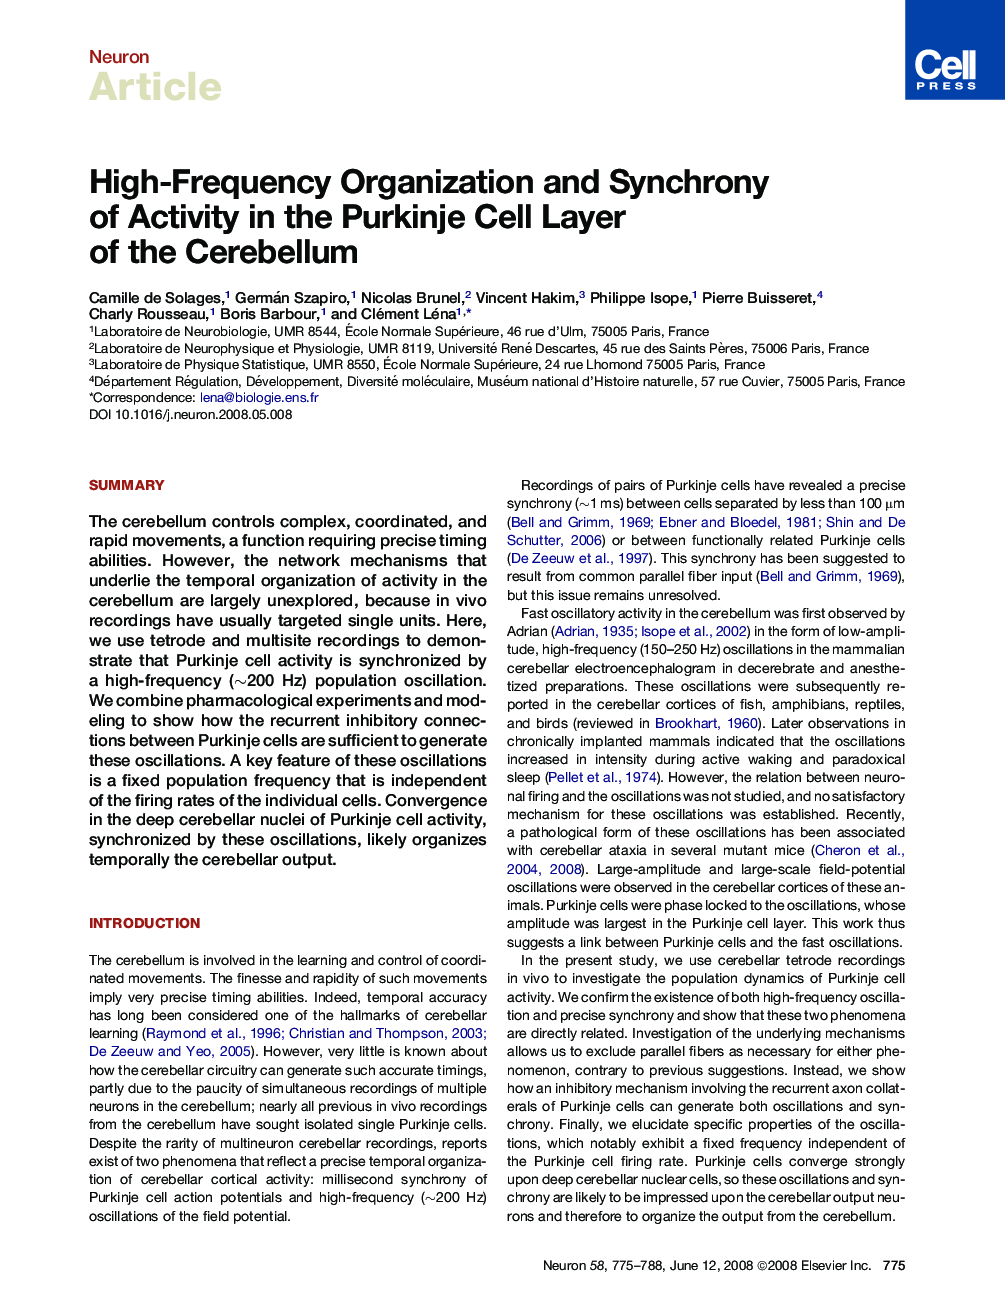 High-Frequency Organization and Synchrony of Activity in the Purkinje Cell Layer of the Cerebellum